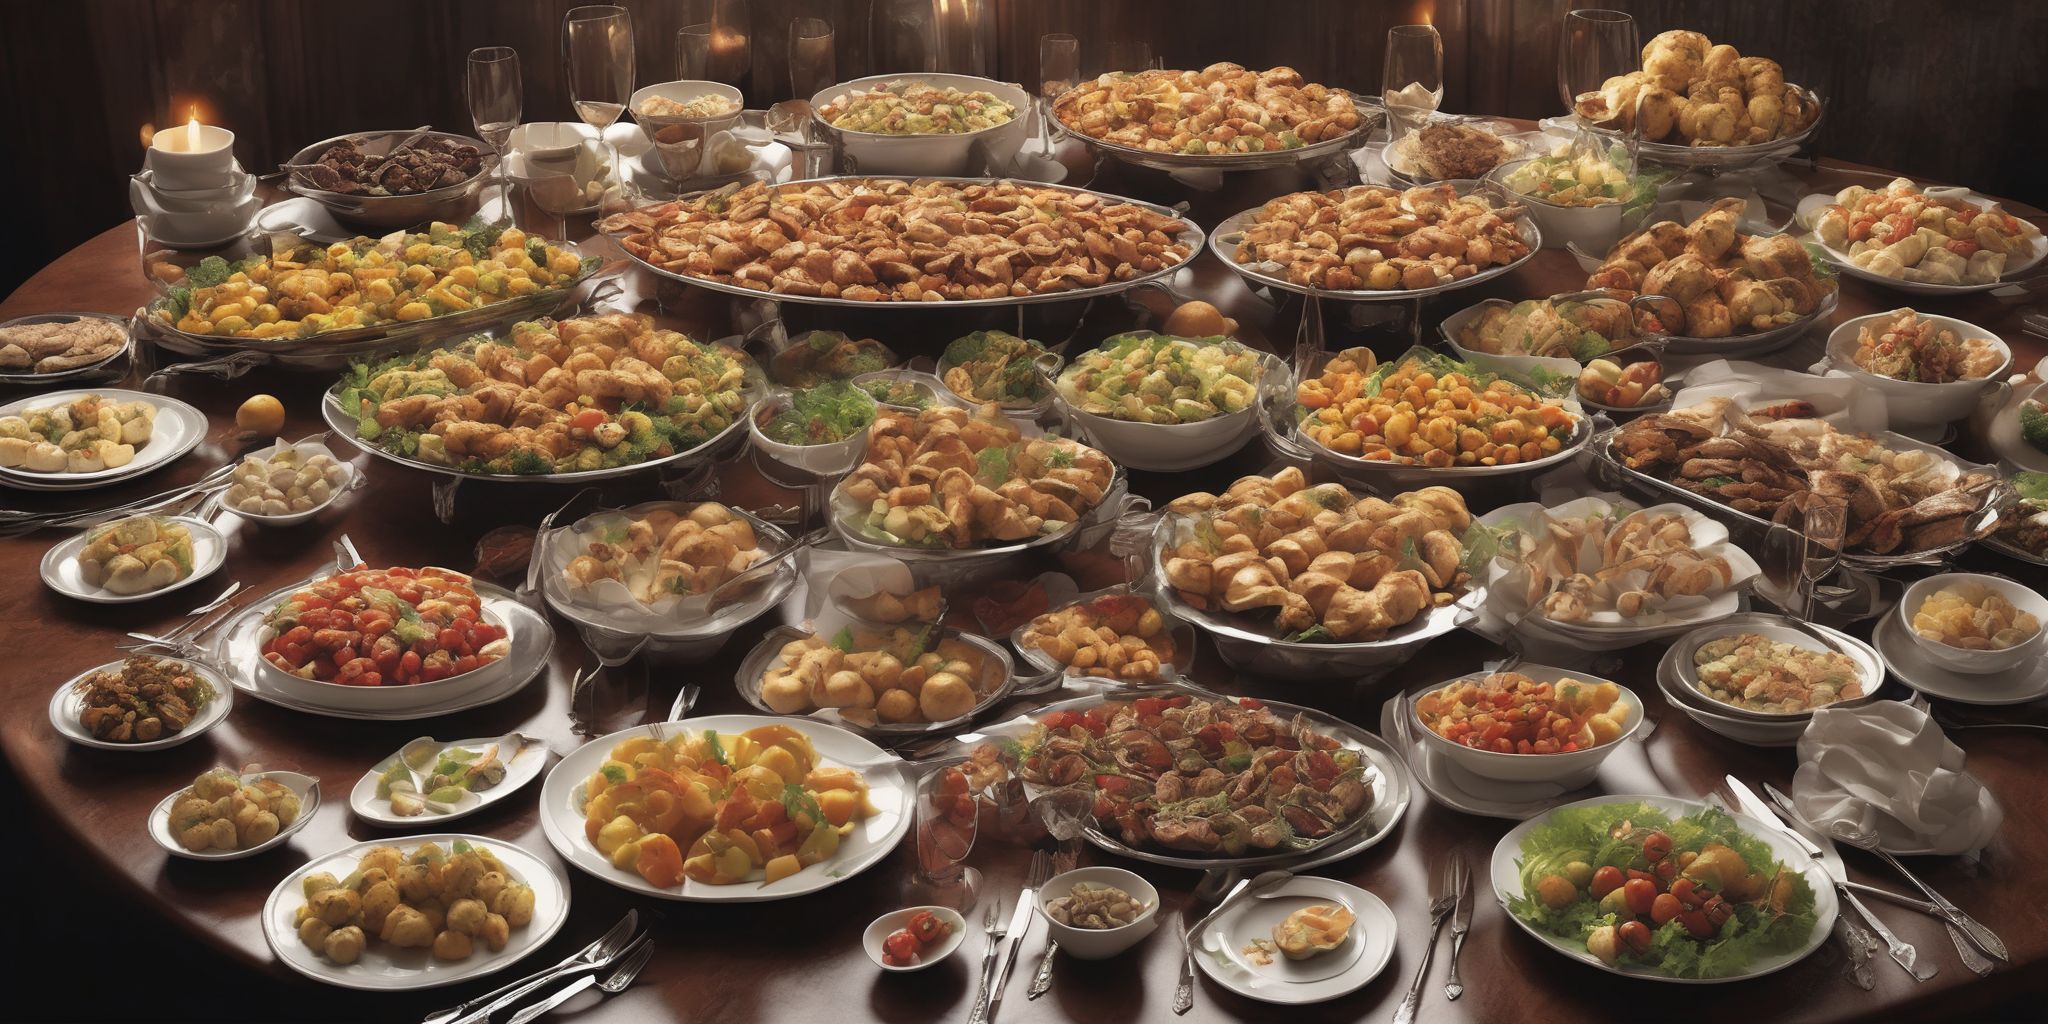 Buffet  in realistic, photographic style